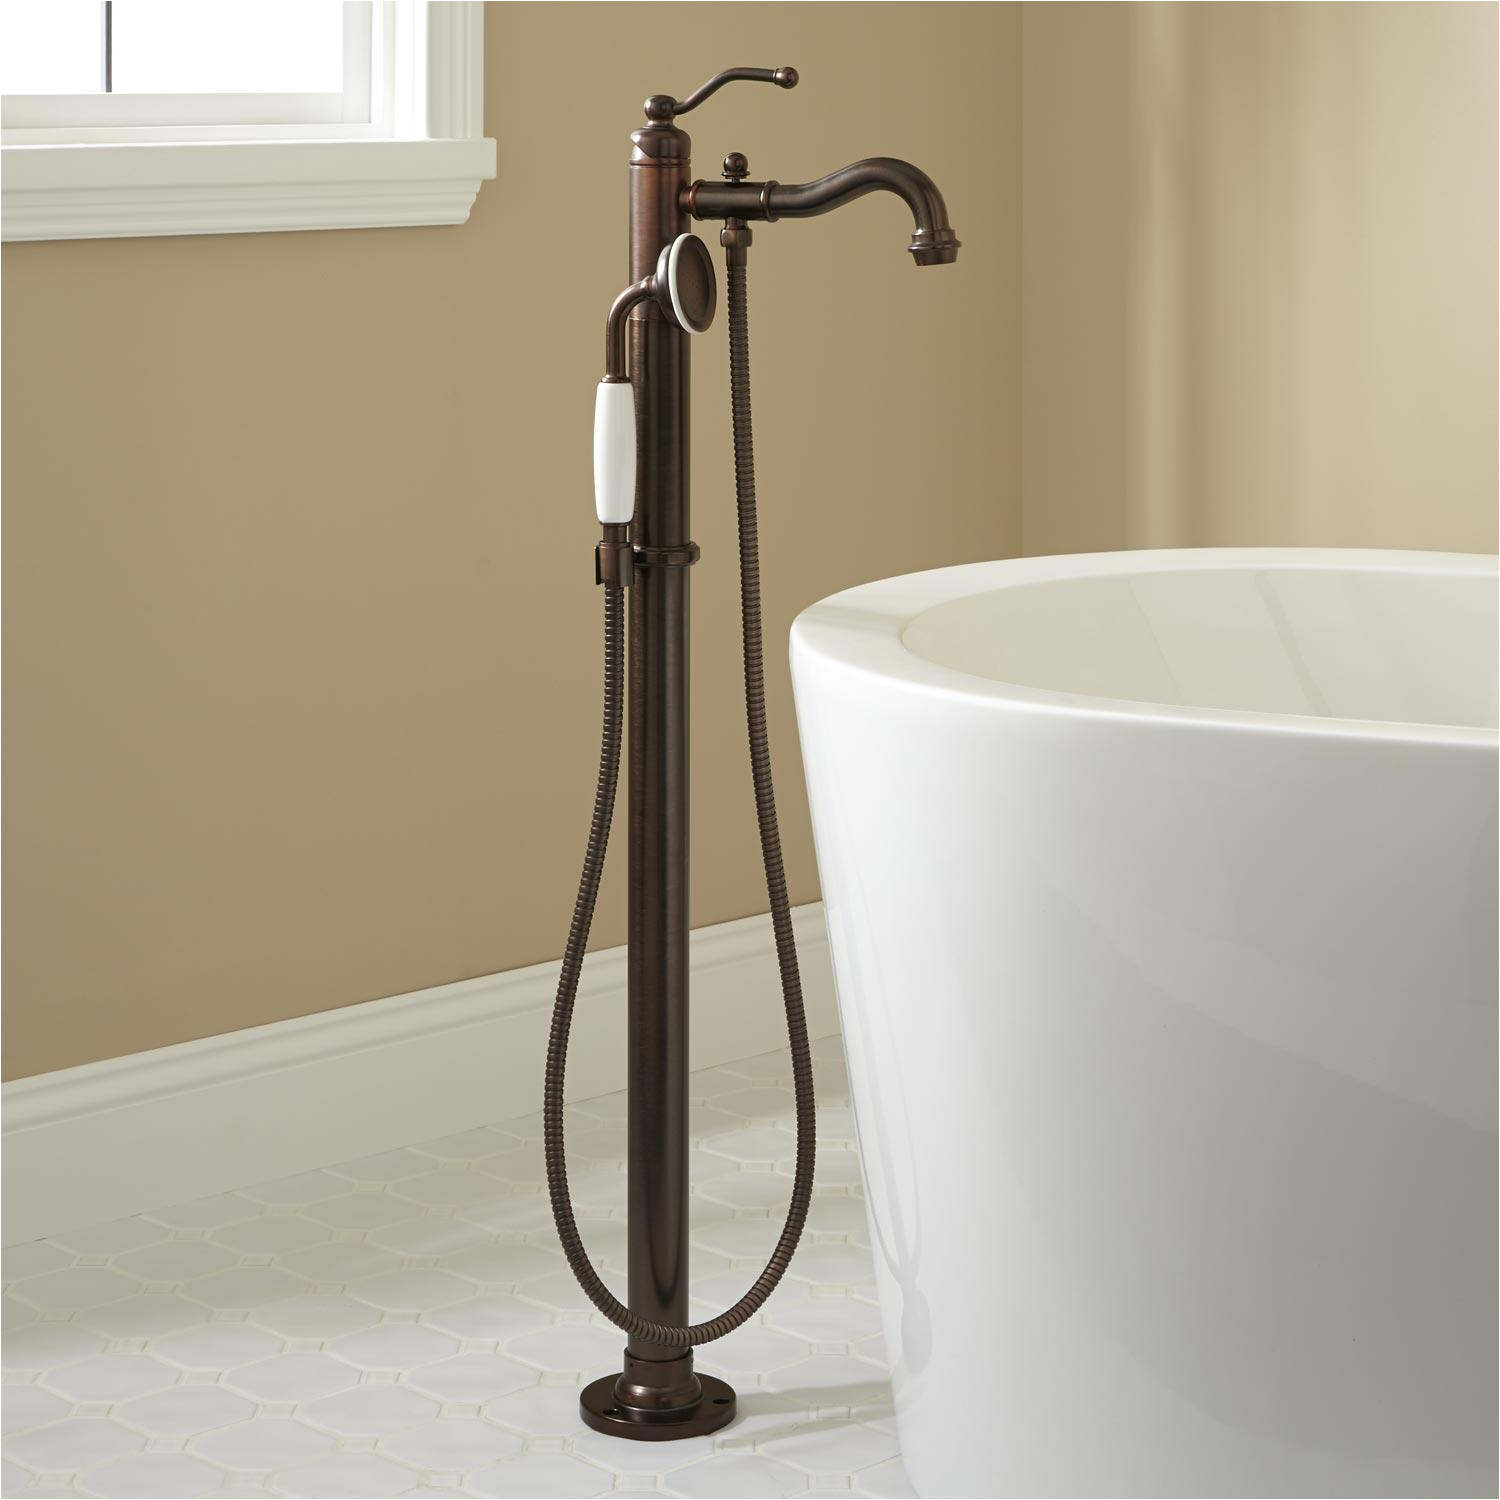 Freestanding Bathtub Faucet Bronze Leta Freestanding Tub Faucet with Hand Shower Oil Rubbed